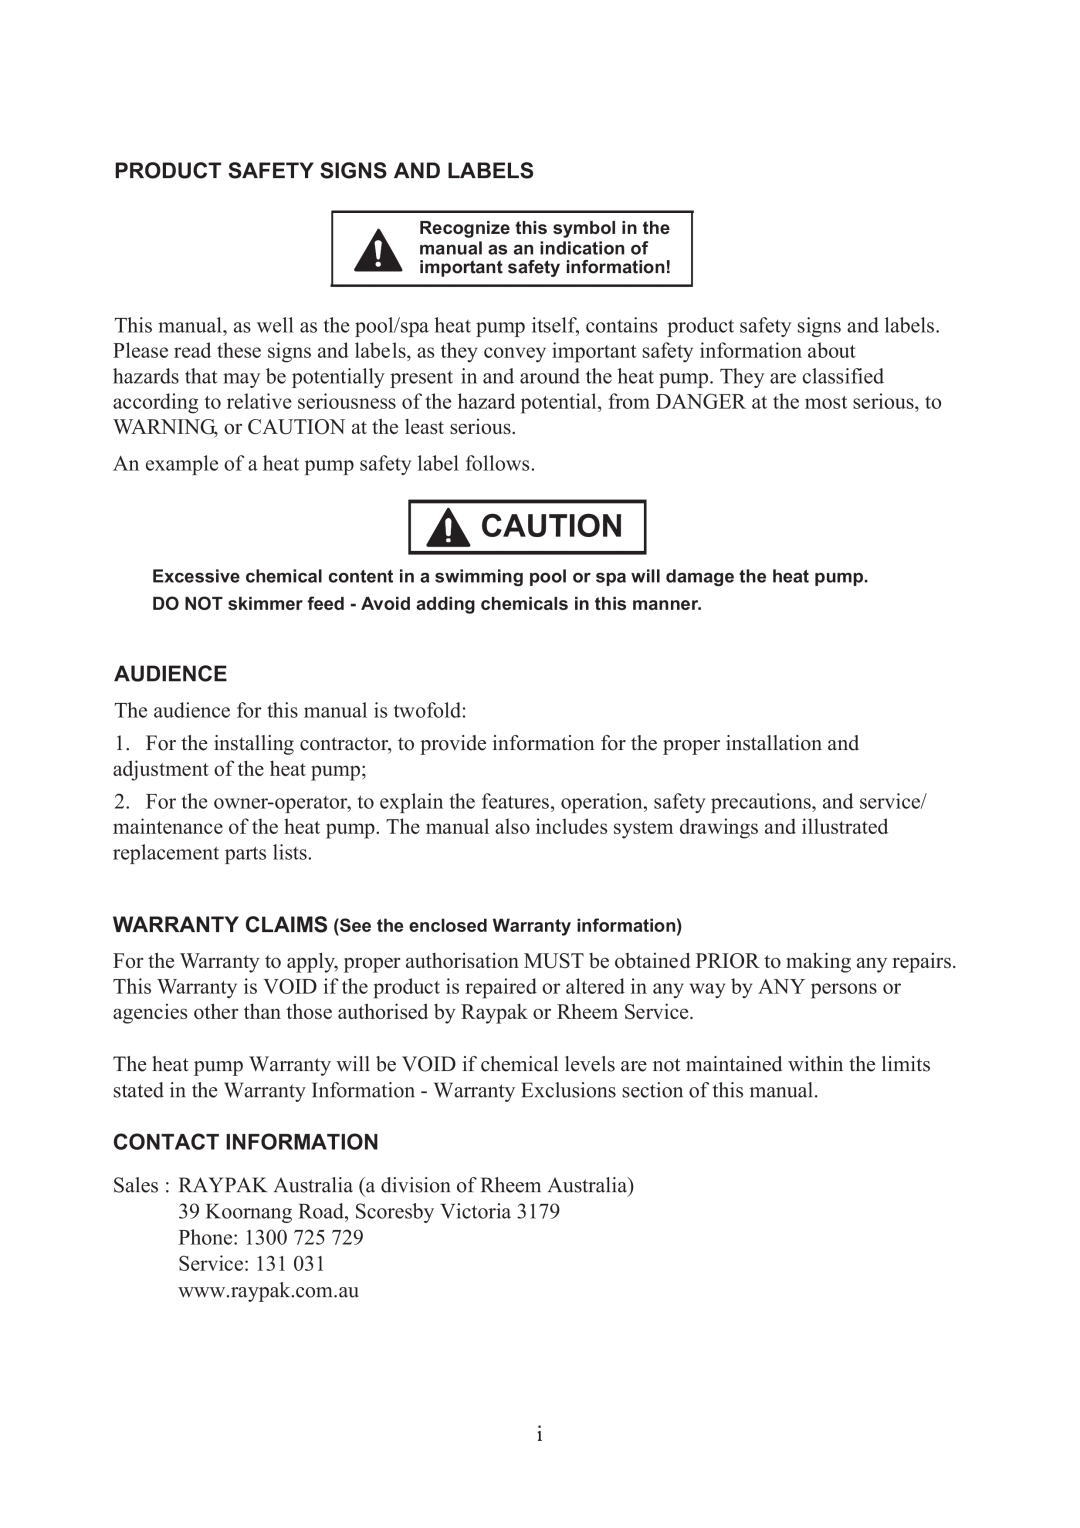 Raypak RHP 33 installation manual Product Safety Signs And Labels, Audience, Contact Information 